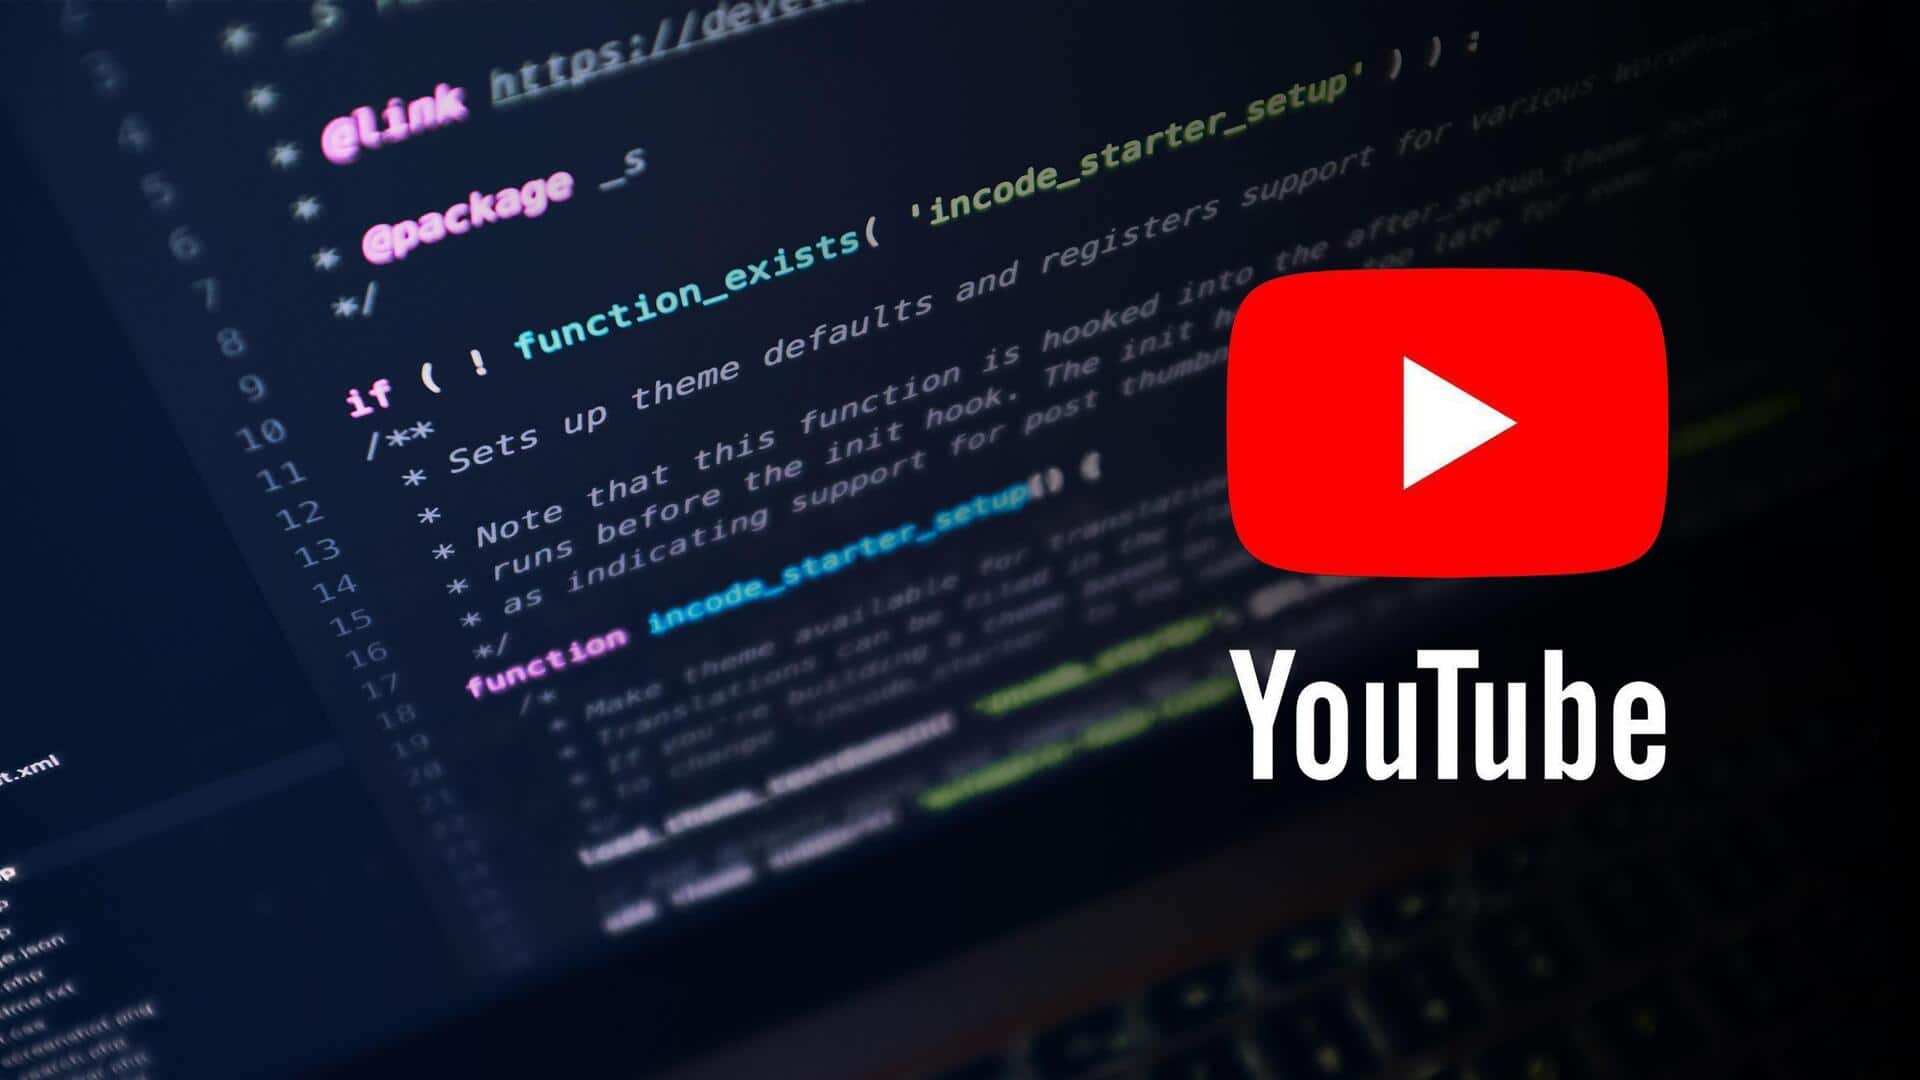 #CareerBytes: Want to learn C, C++? Follow these YouTube channels